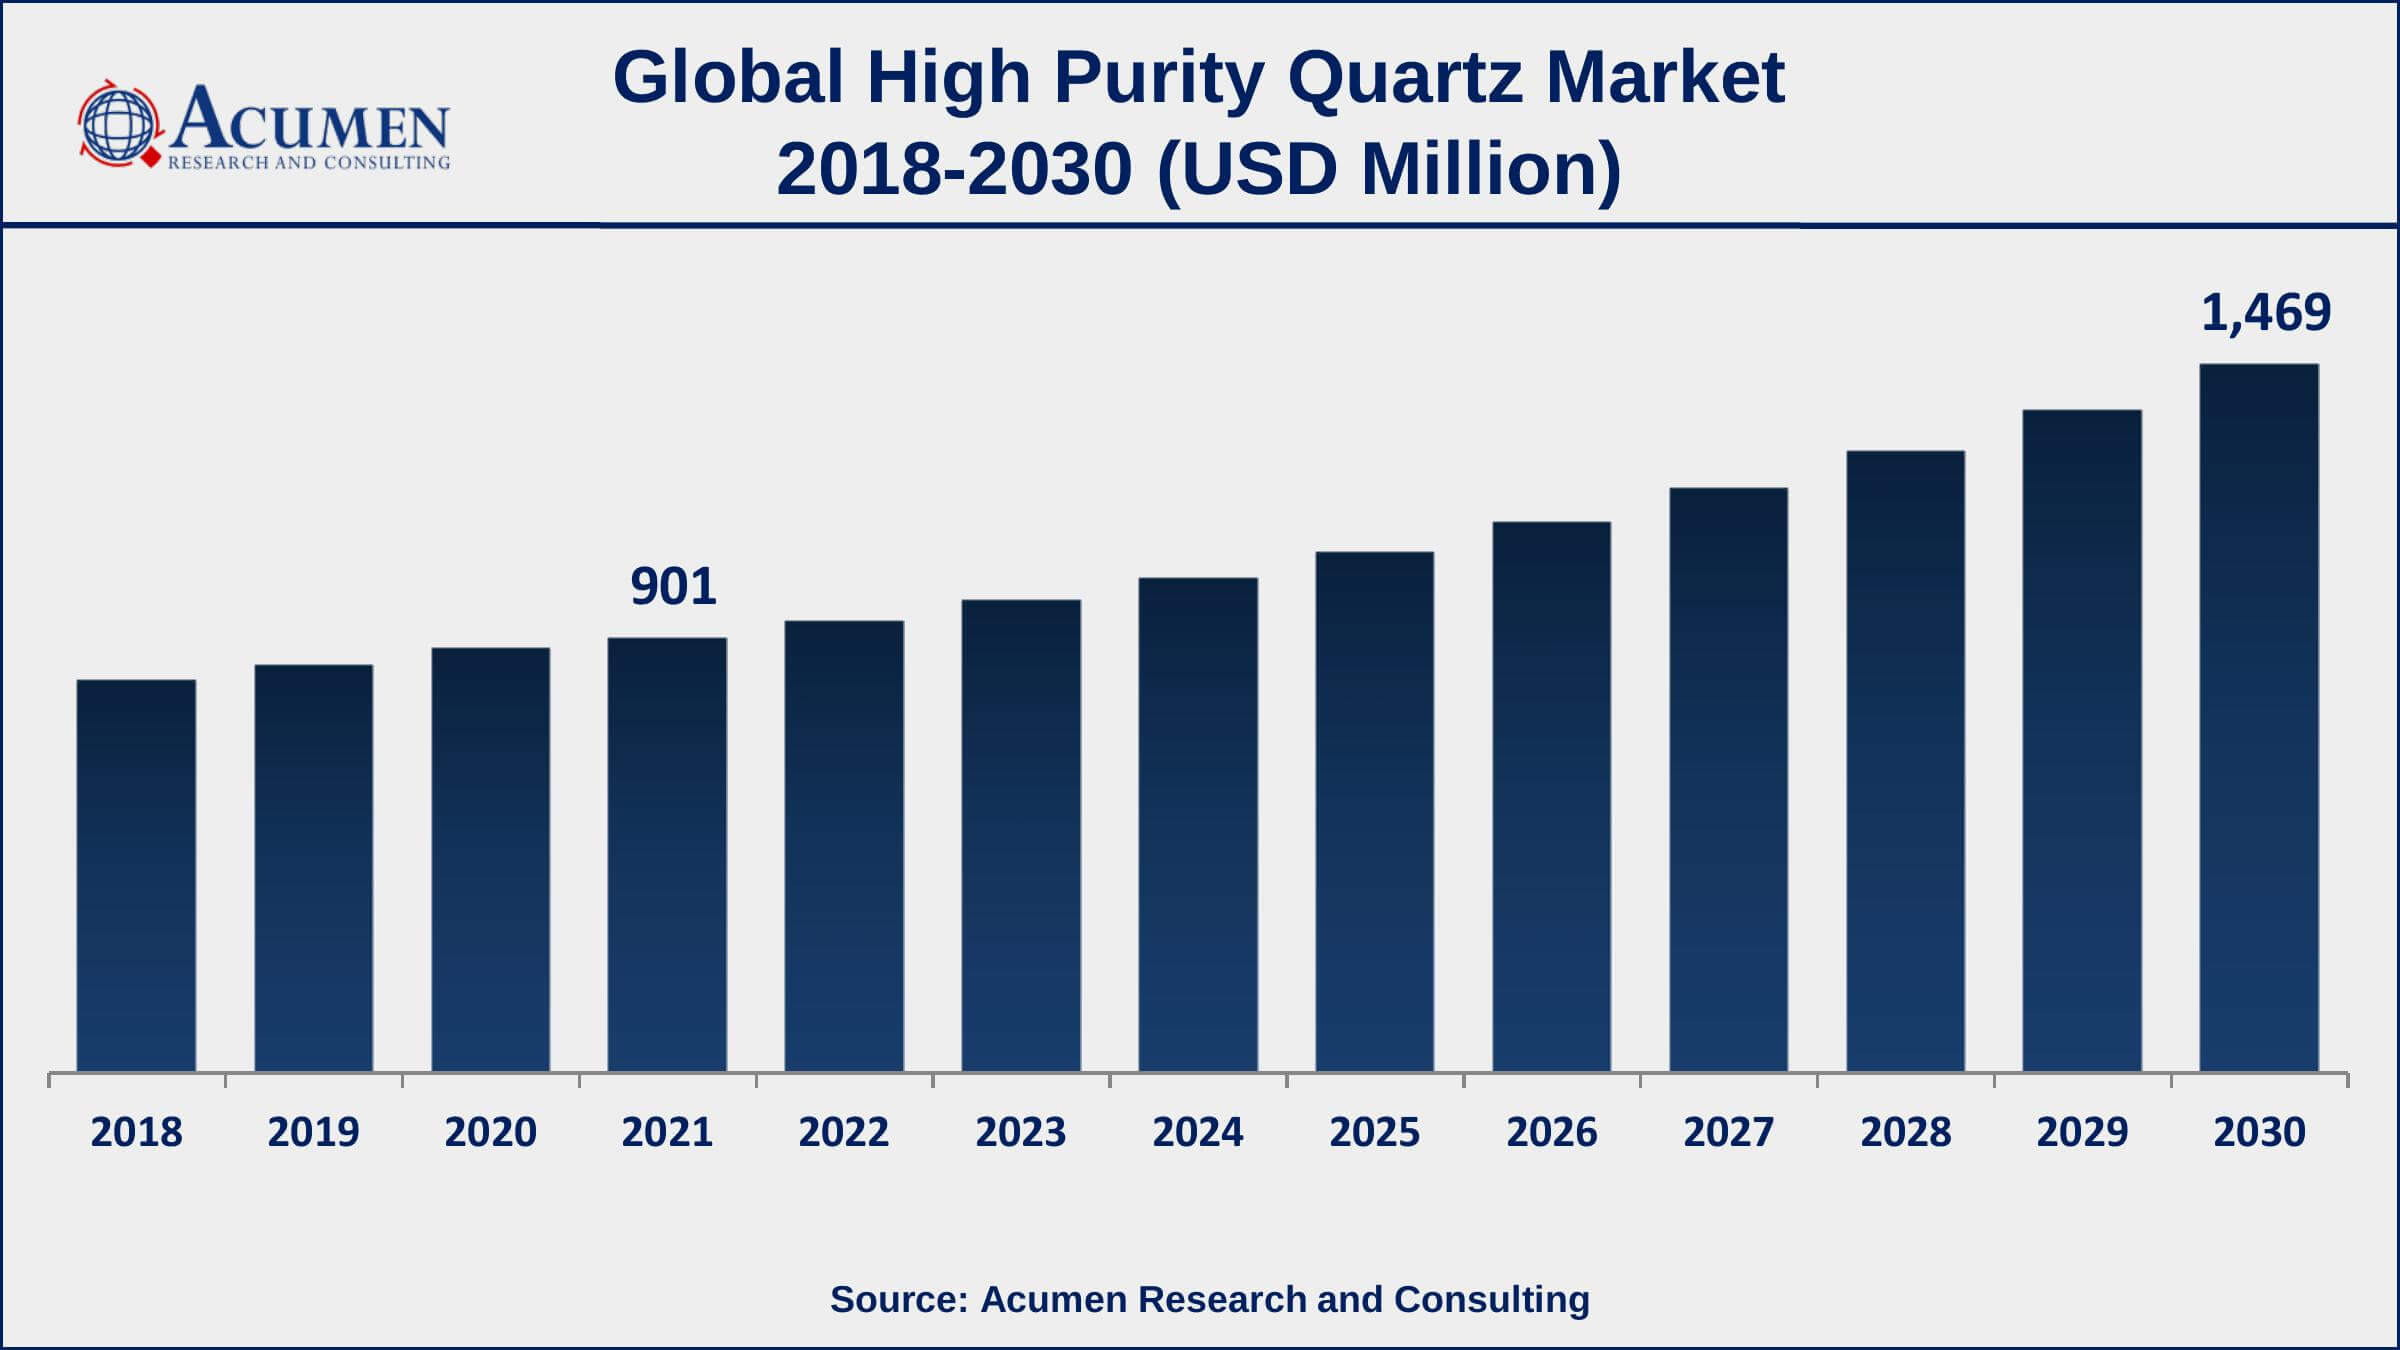 North America high purity quartz market growth will observe highest CAGR from 2022 to 2030